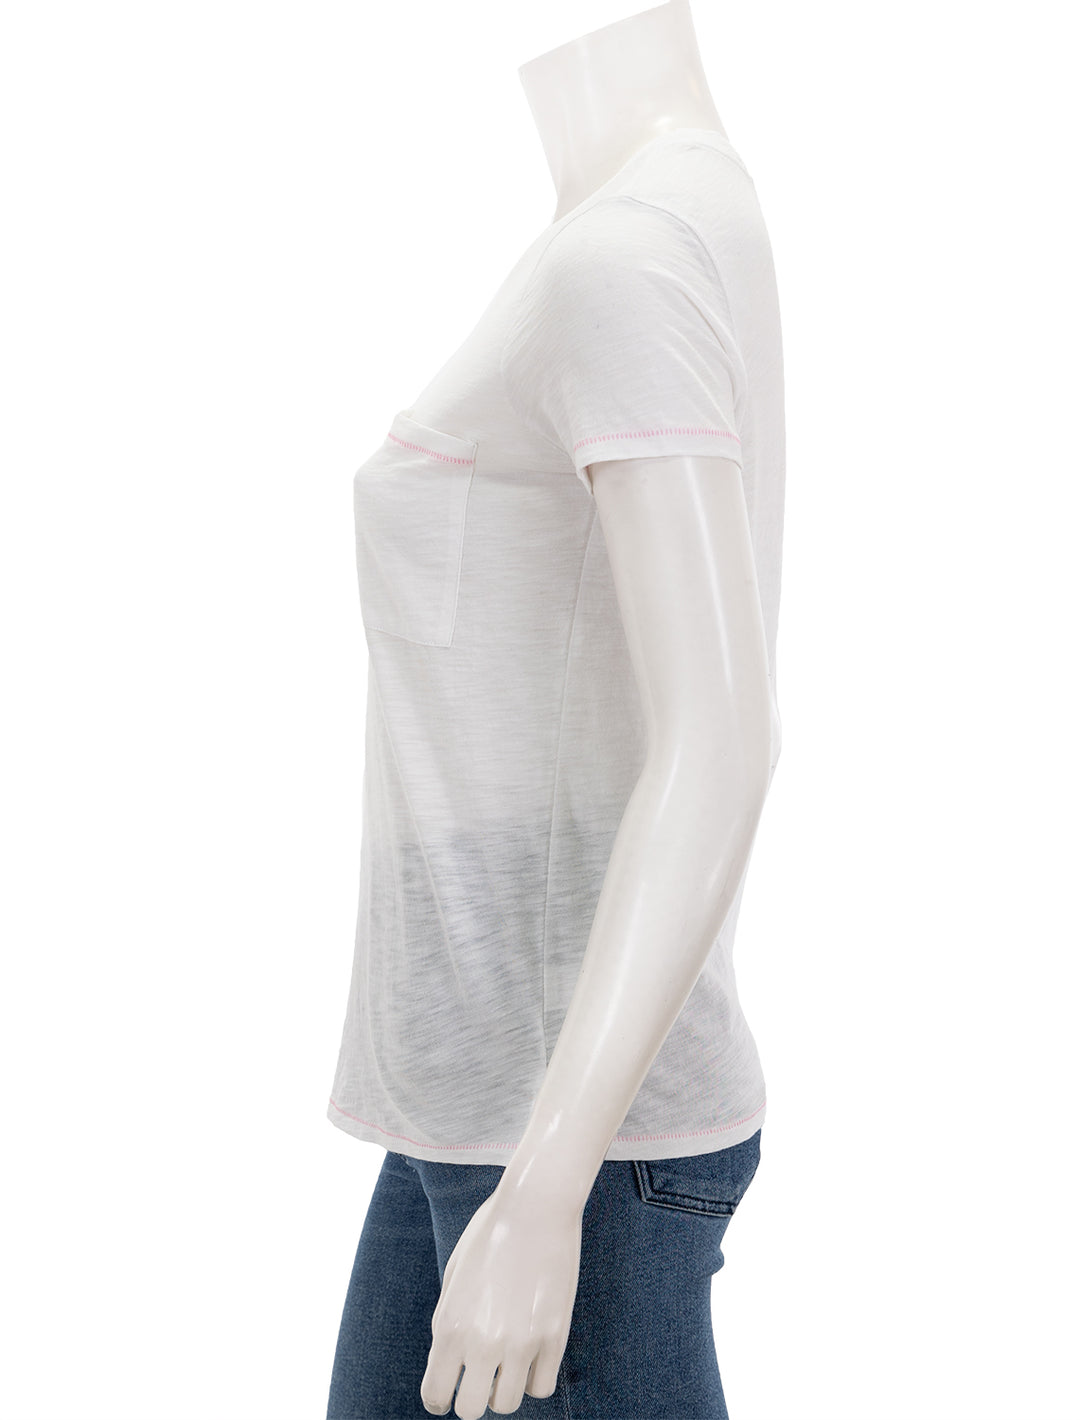 Side view of Goldie Lewinter's contrast stitch pocket boy tee in white and pink.